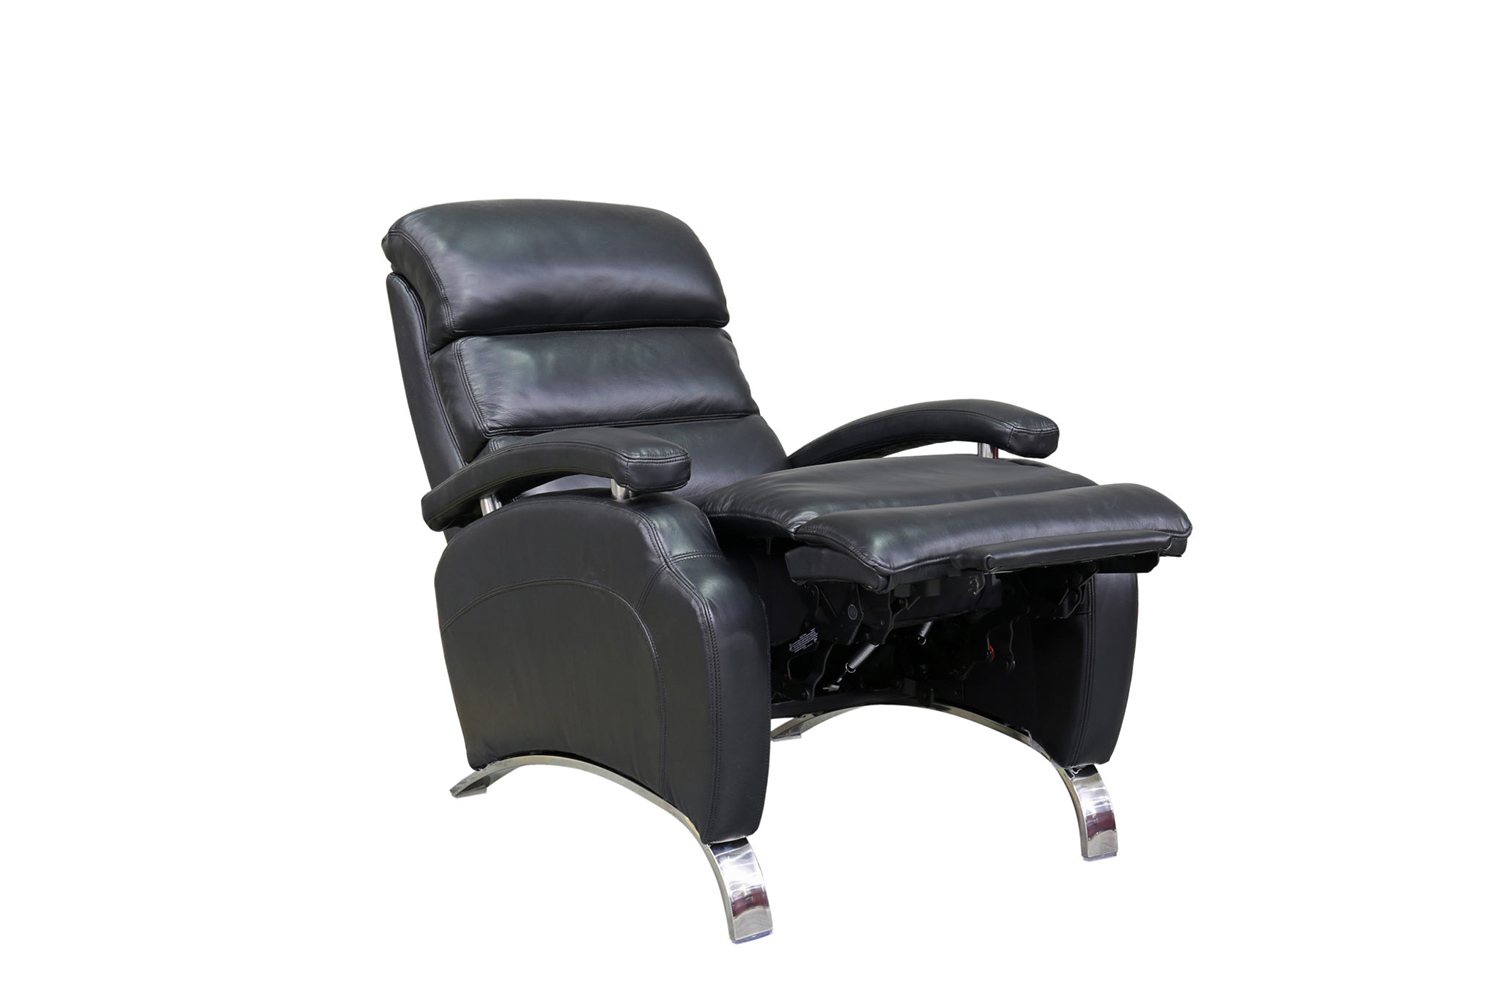 Barcalounger Giovanni Recliner Chair - Wenlock Onyx/all leather